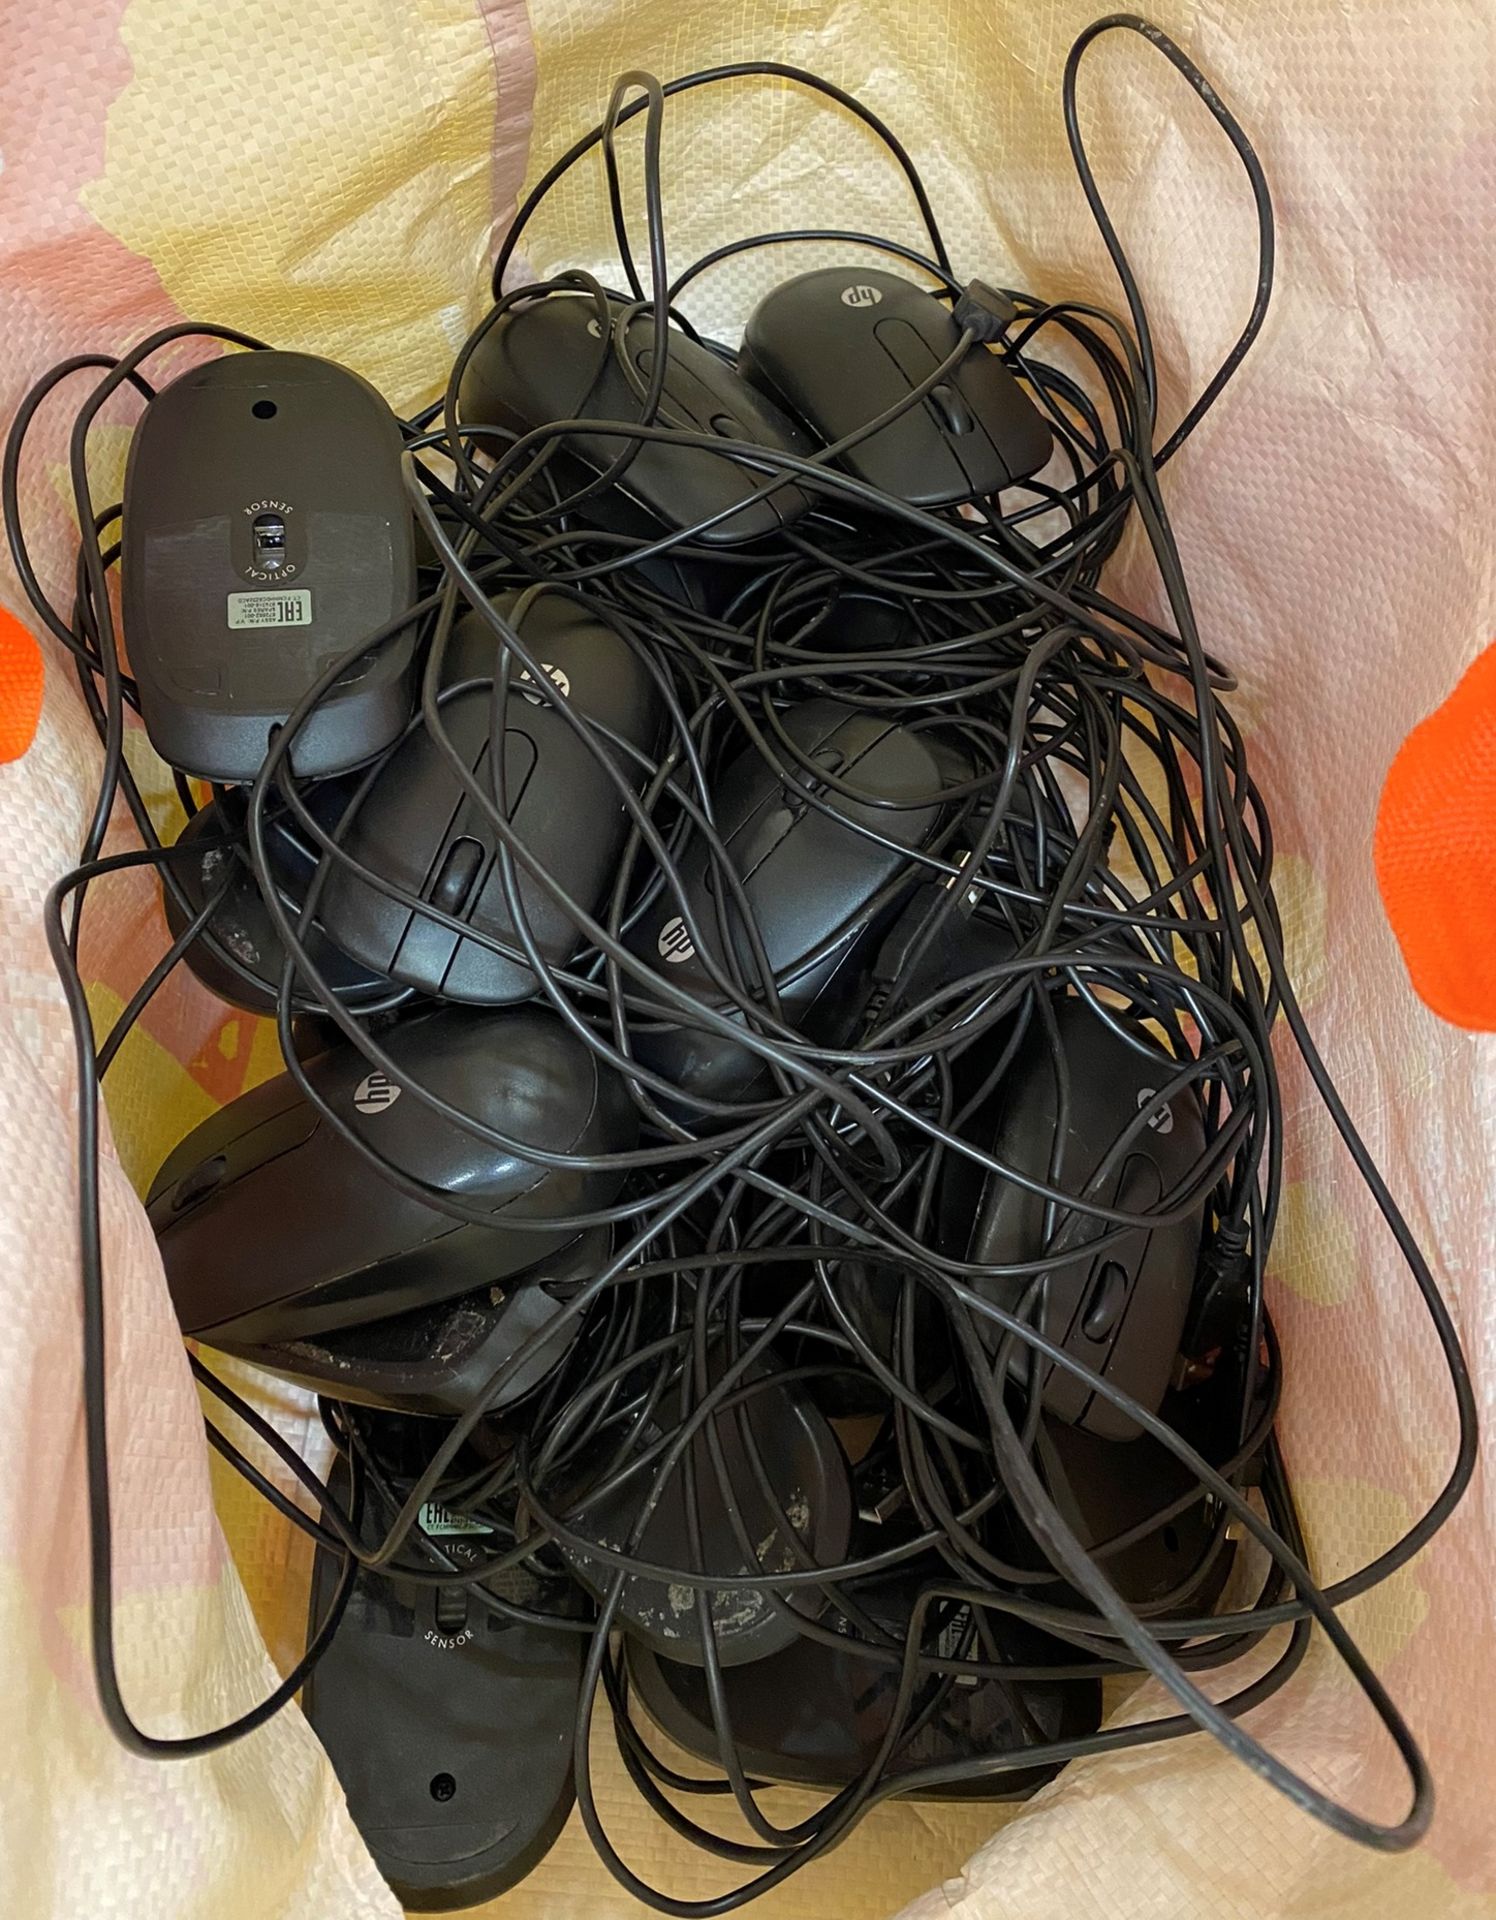 Contents to 3 Bags - Approximately 60 Assorted Wired Mice - Image 2 of 4